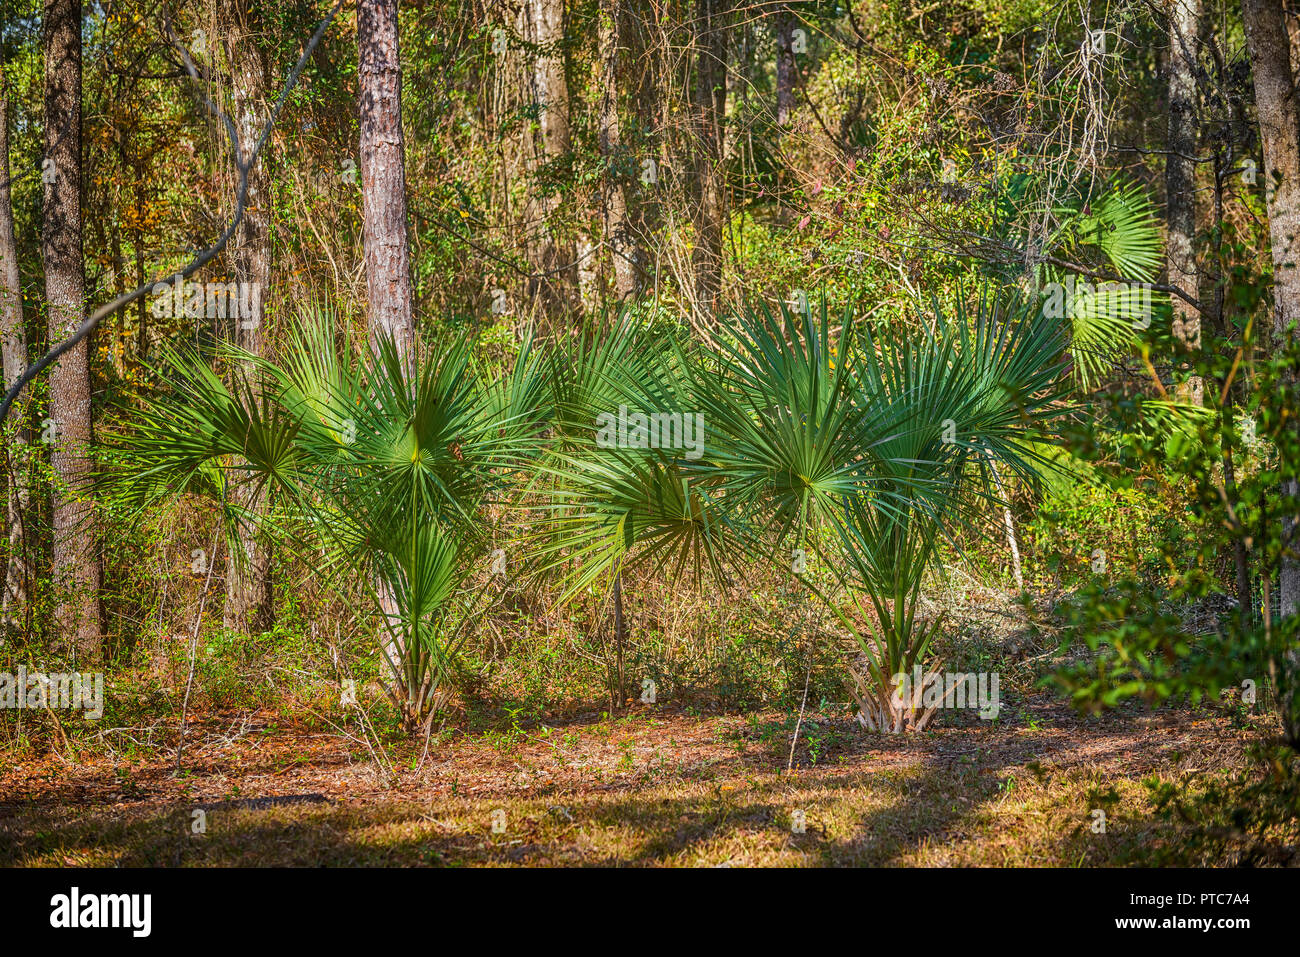 Sabal Palmetto trees in a natural wooded area of North Central Florida. Stock Photo